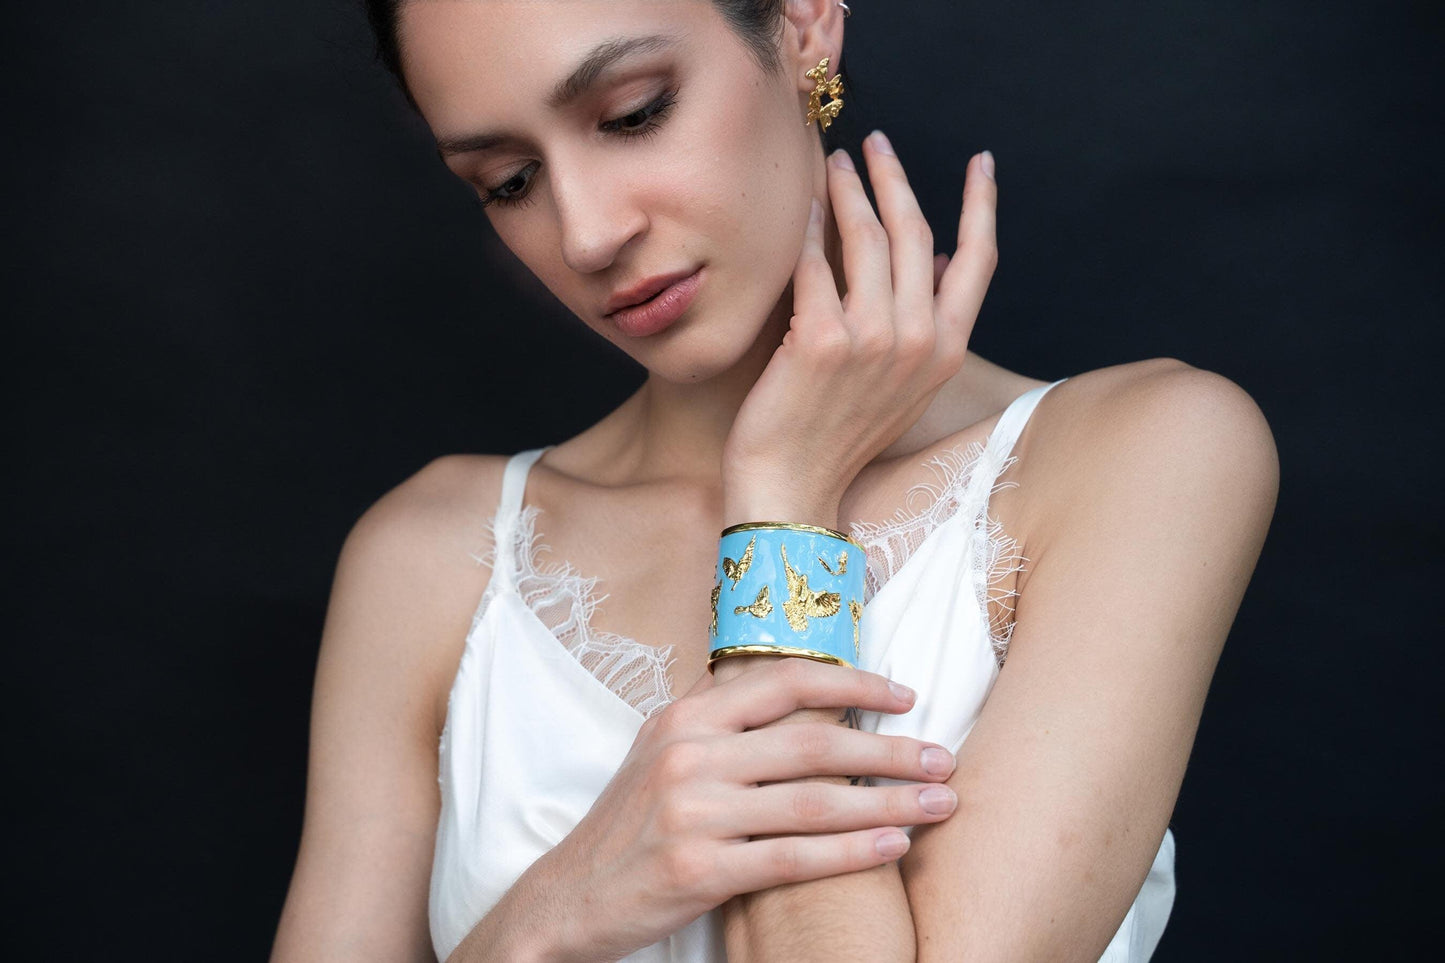 Unique Cuff Bracelet "Arise" - Gold & Sky Blue with Clouds Gift, Gift For Mom, Artistic, Jewelry Cuff, Bracelet, Gold, Silver, Brass